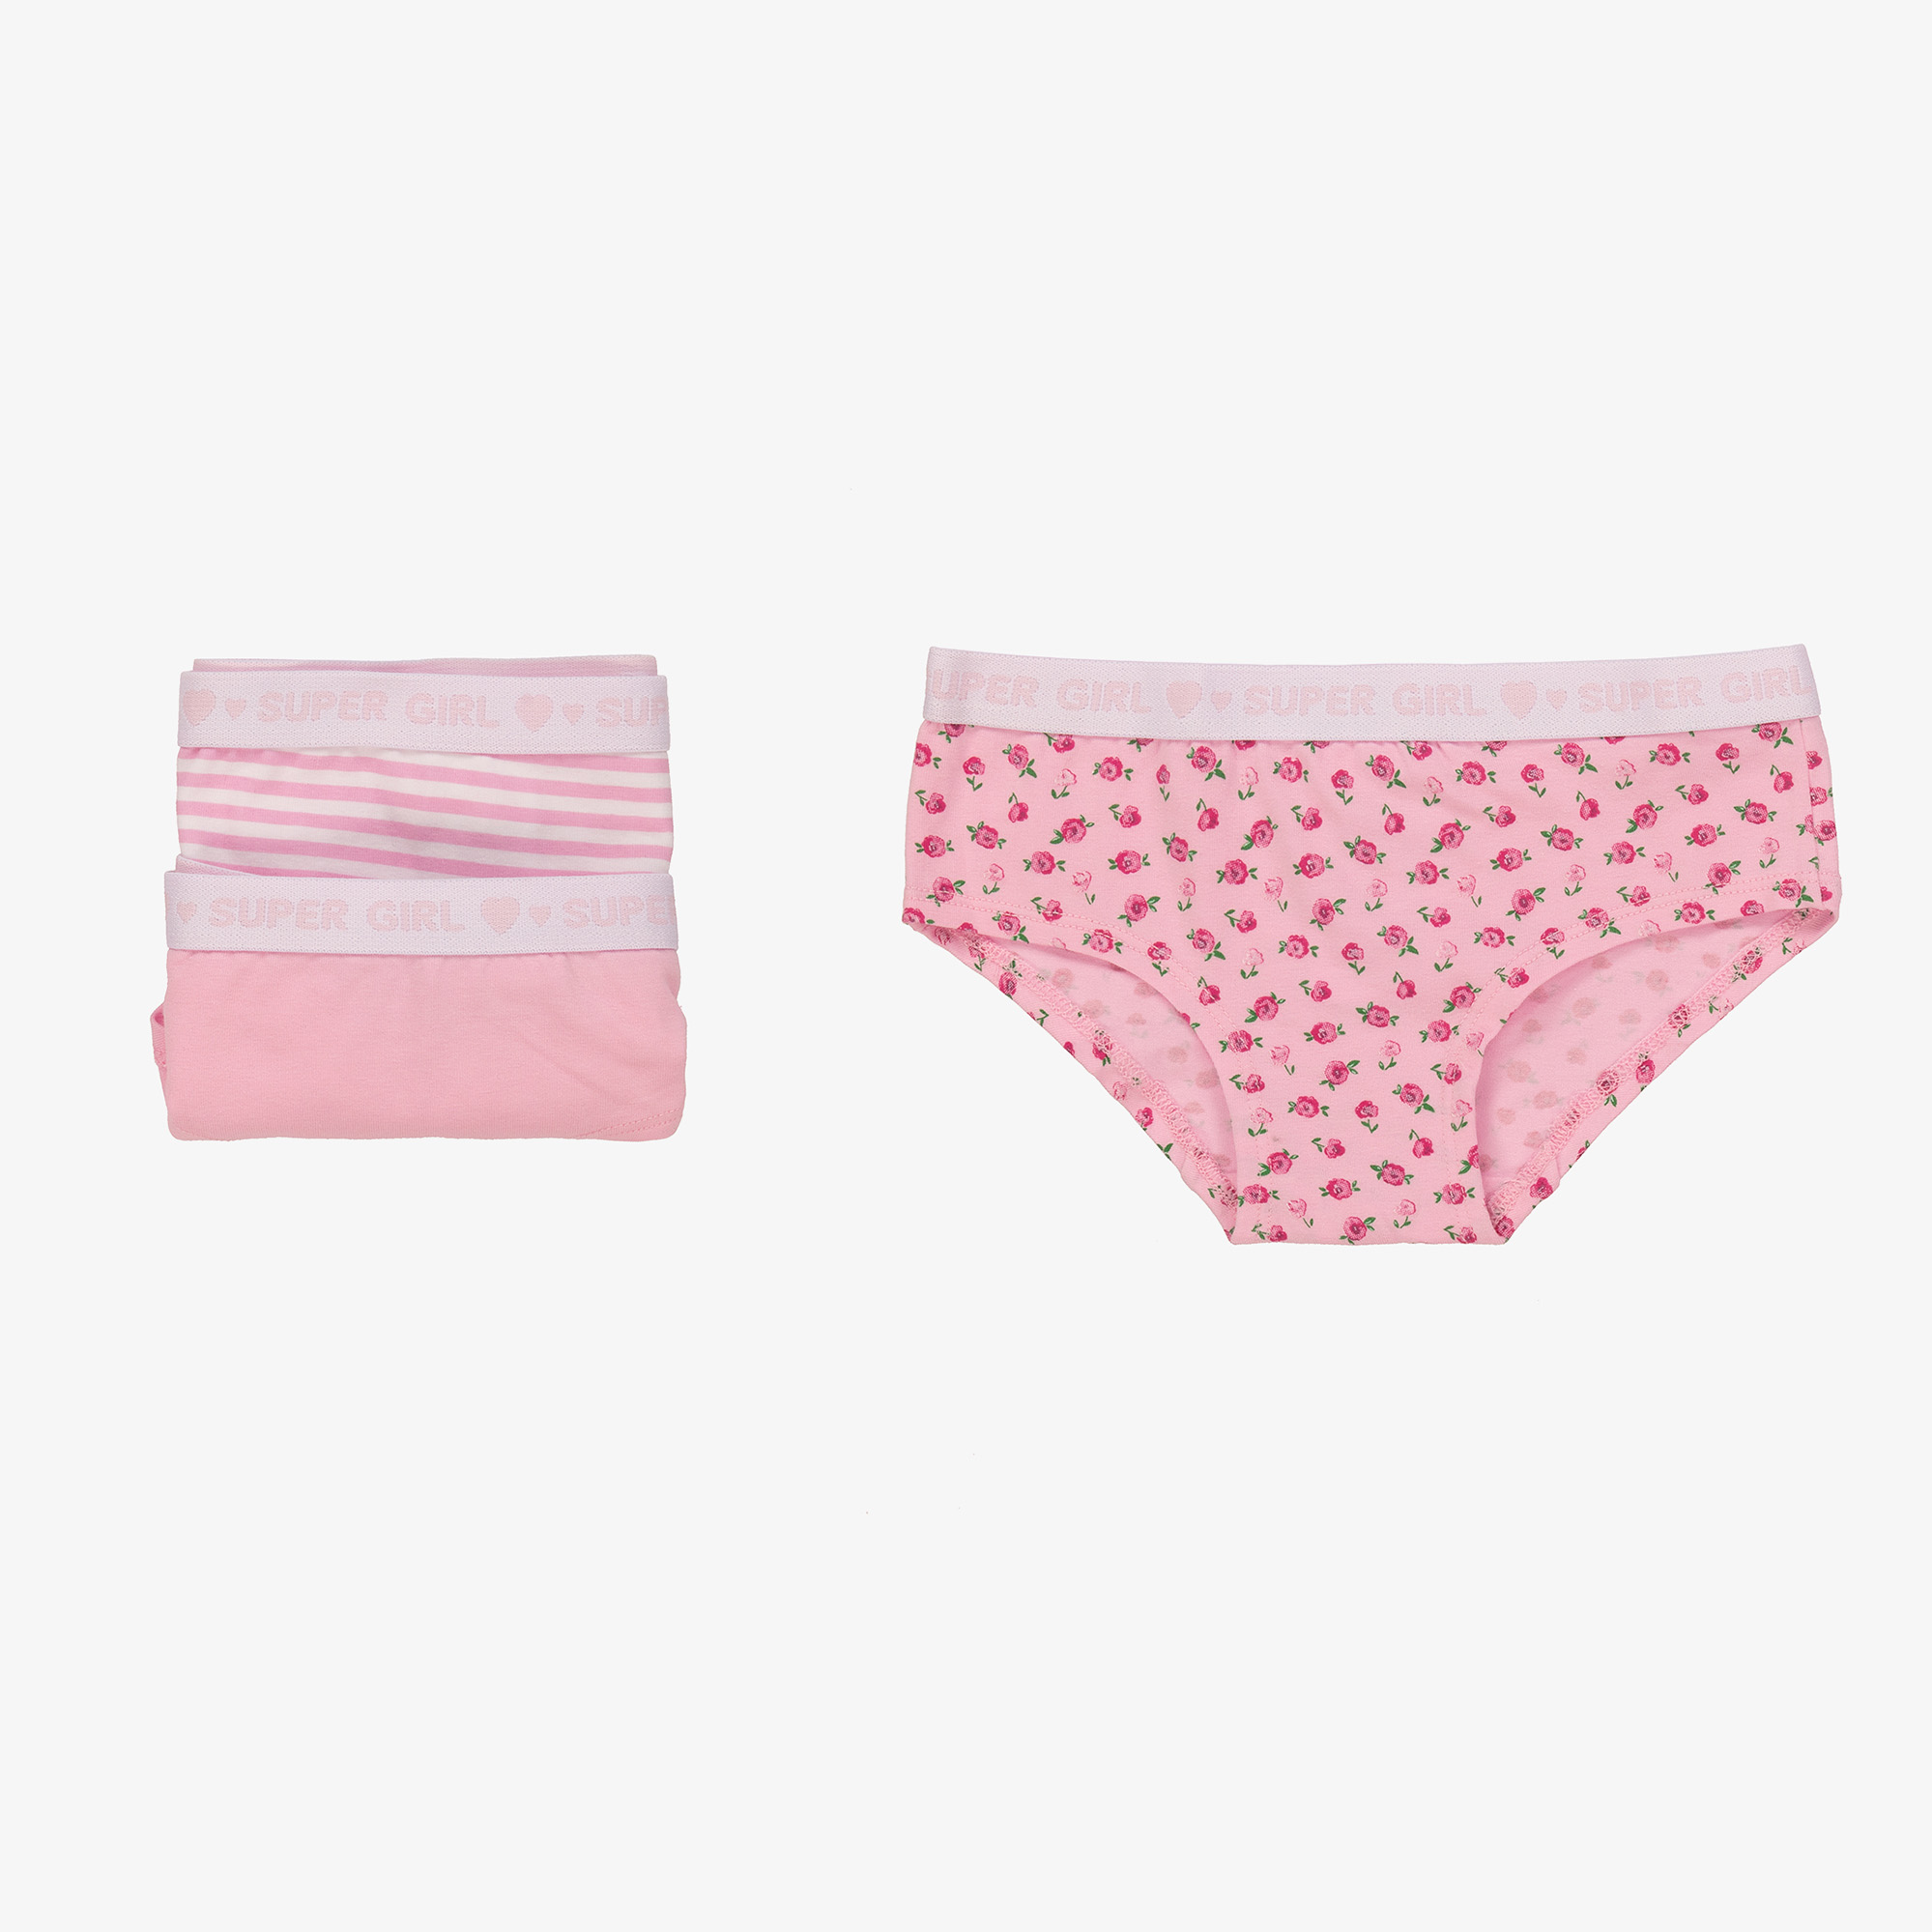 Mayoral Teen Girls Pink Cotton Knickers (3 Pack)